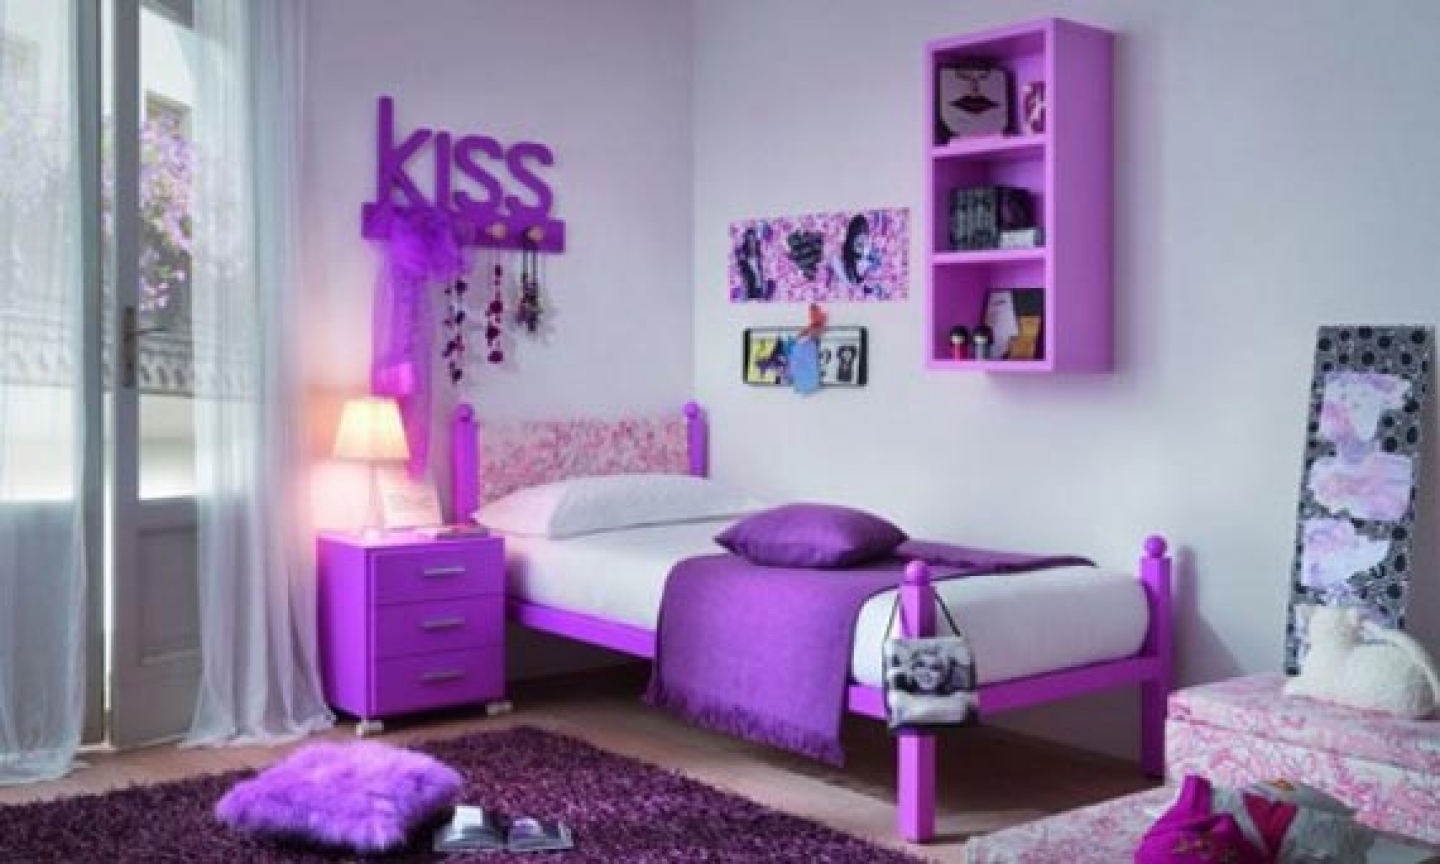 girl decorations for bedroom photo - 2